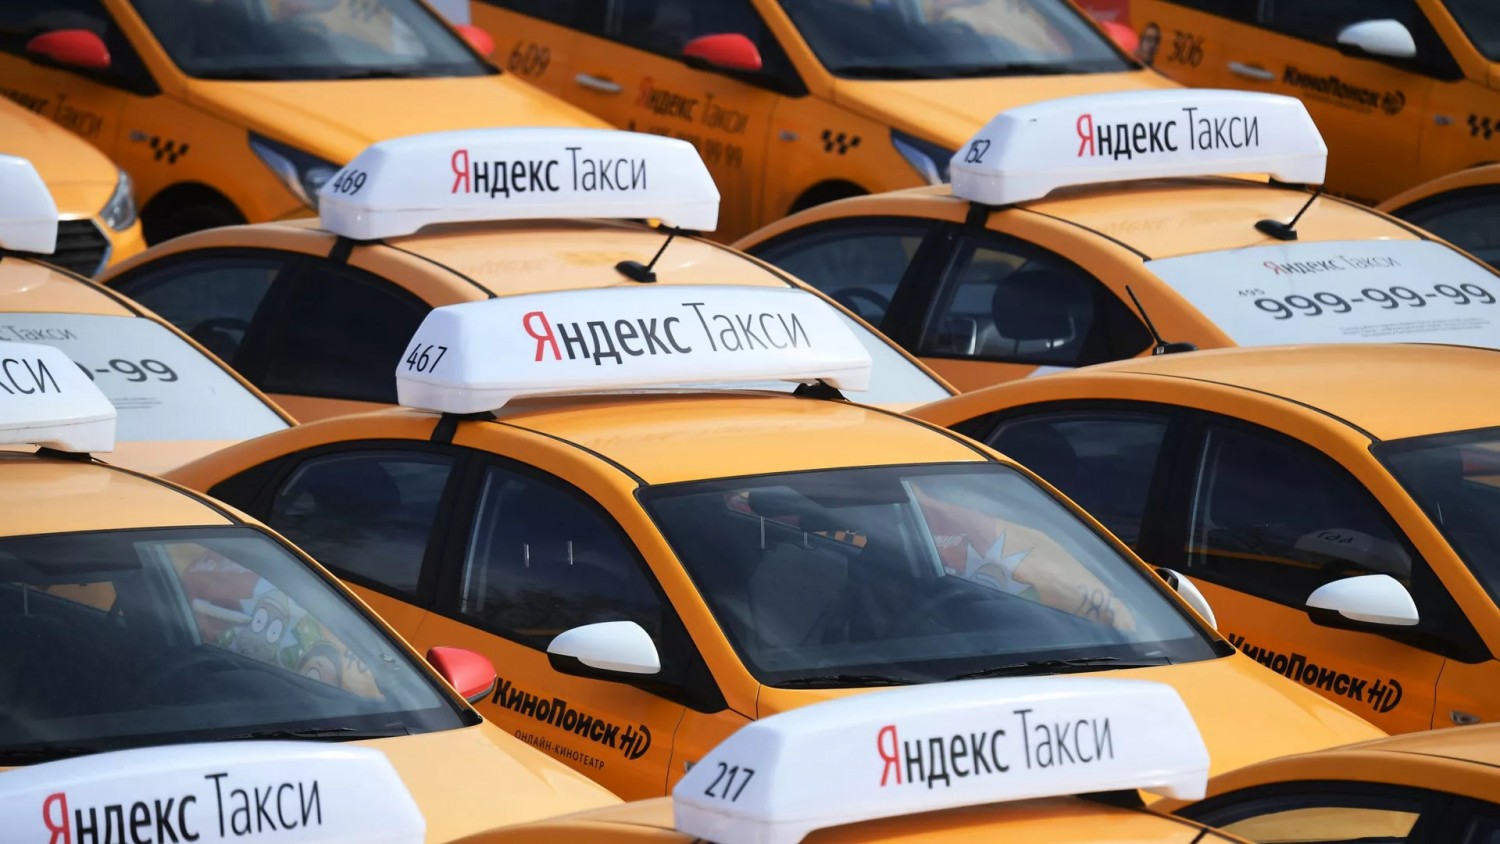 FAS Revealed Serious Violations at Yandex.Taxi